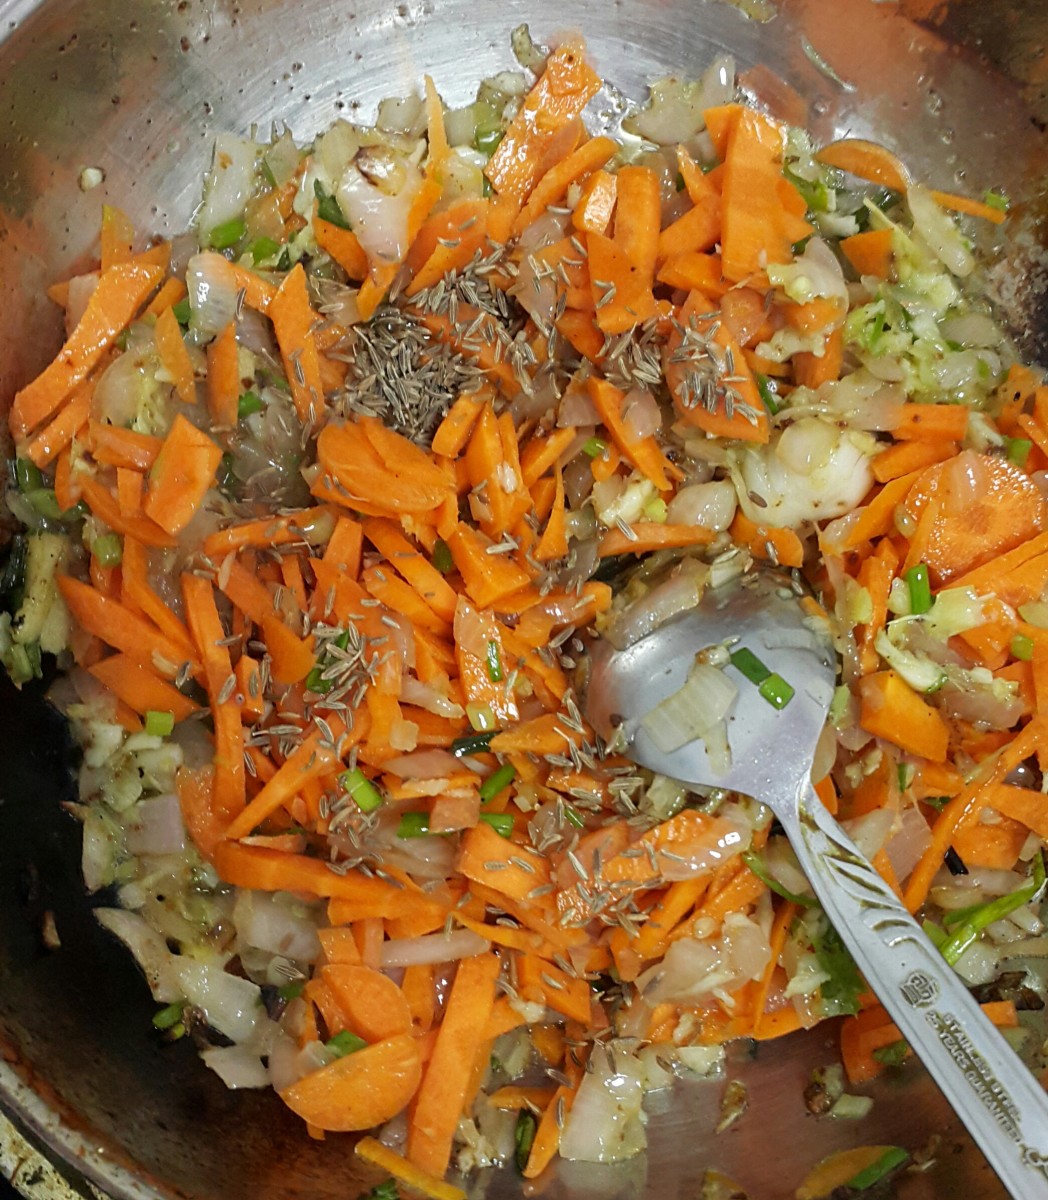 Carrots (cut into thin slices) added to the vegetable mixture. You can add whole cumin seeds at this stage if you wish to. 